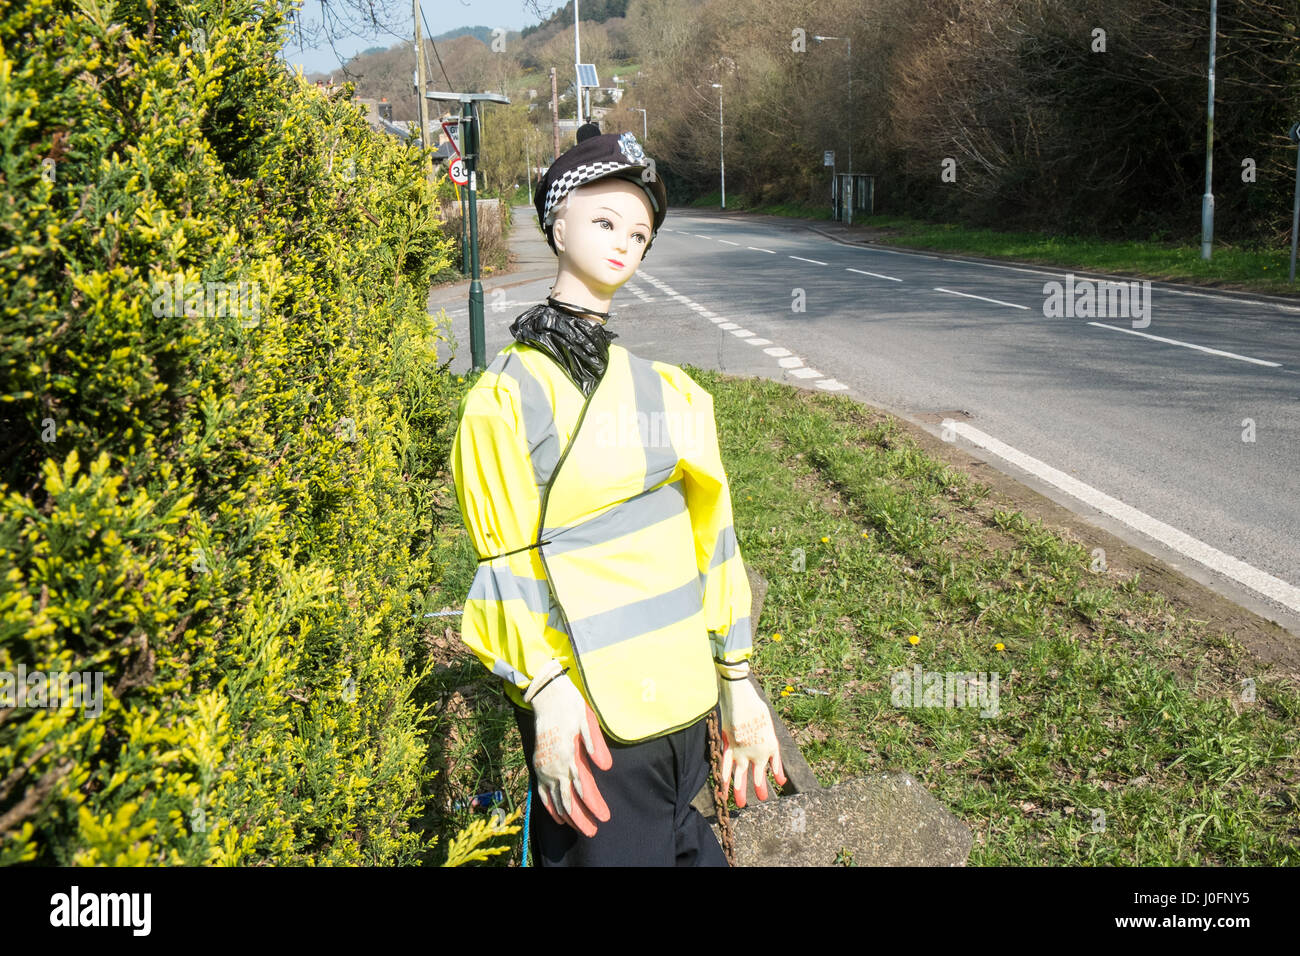 Fake, female,woman,police,officer,doll,mannequin,in,village,of,Tre Taliesin,to,encourage,motorists,drivers,to,slow,down,onA487,road,Ceredigion,Wales, Stock Photo